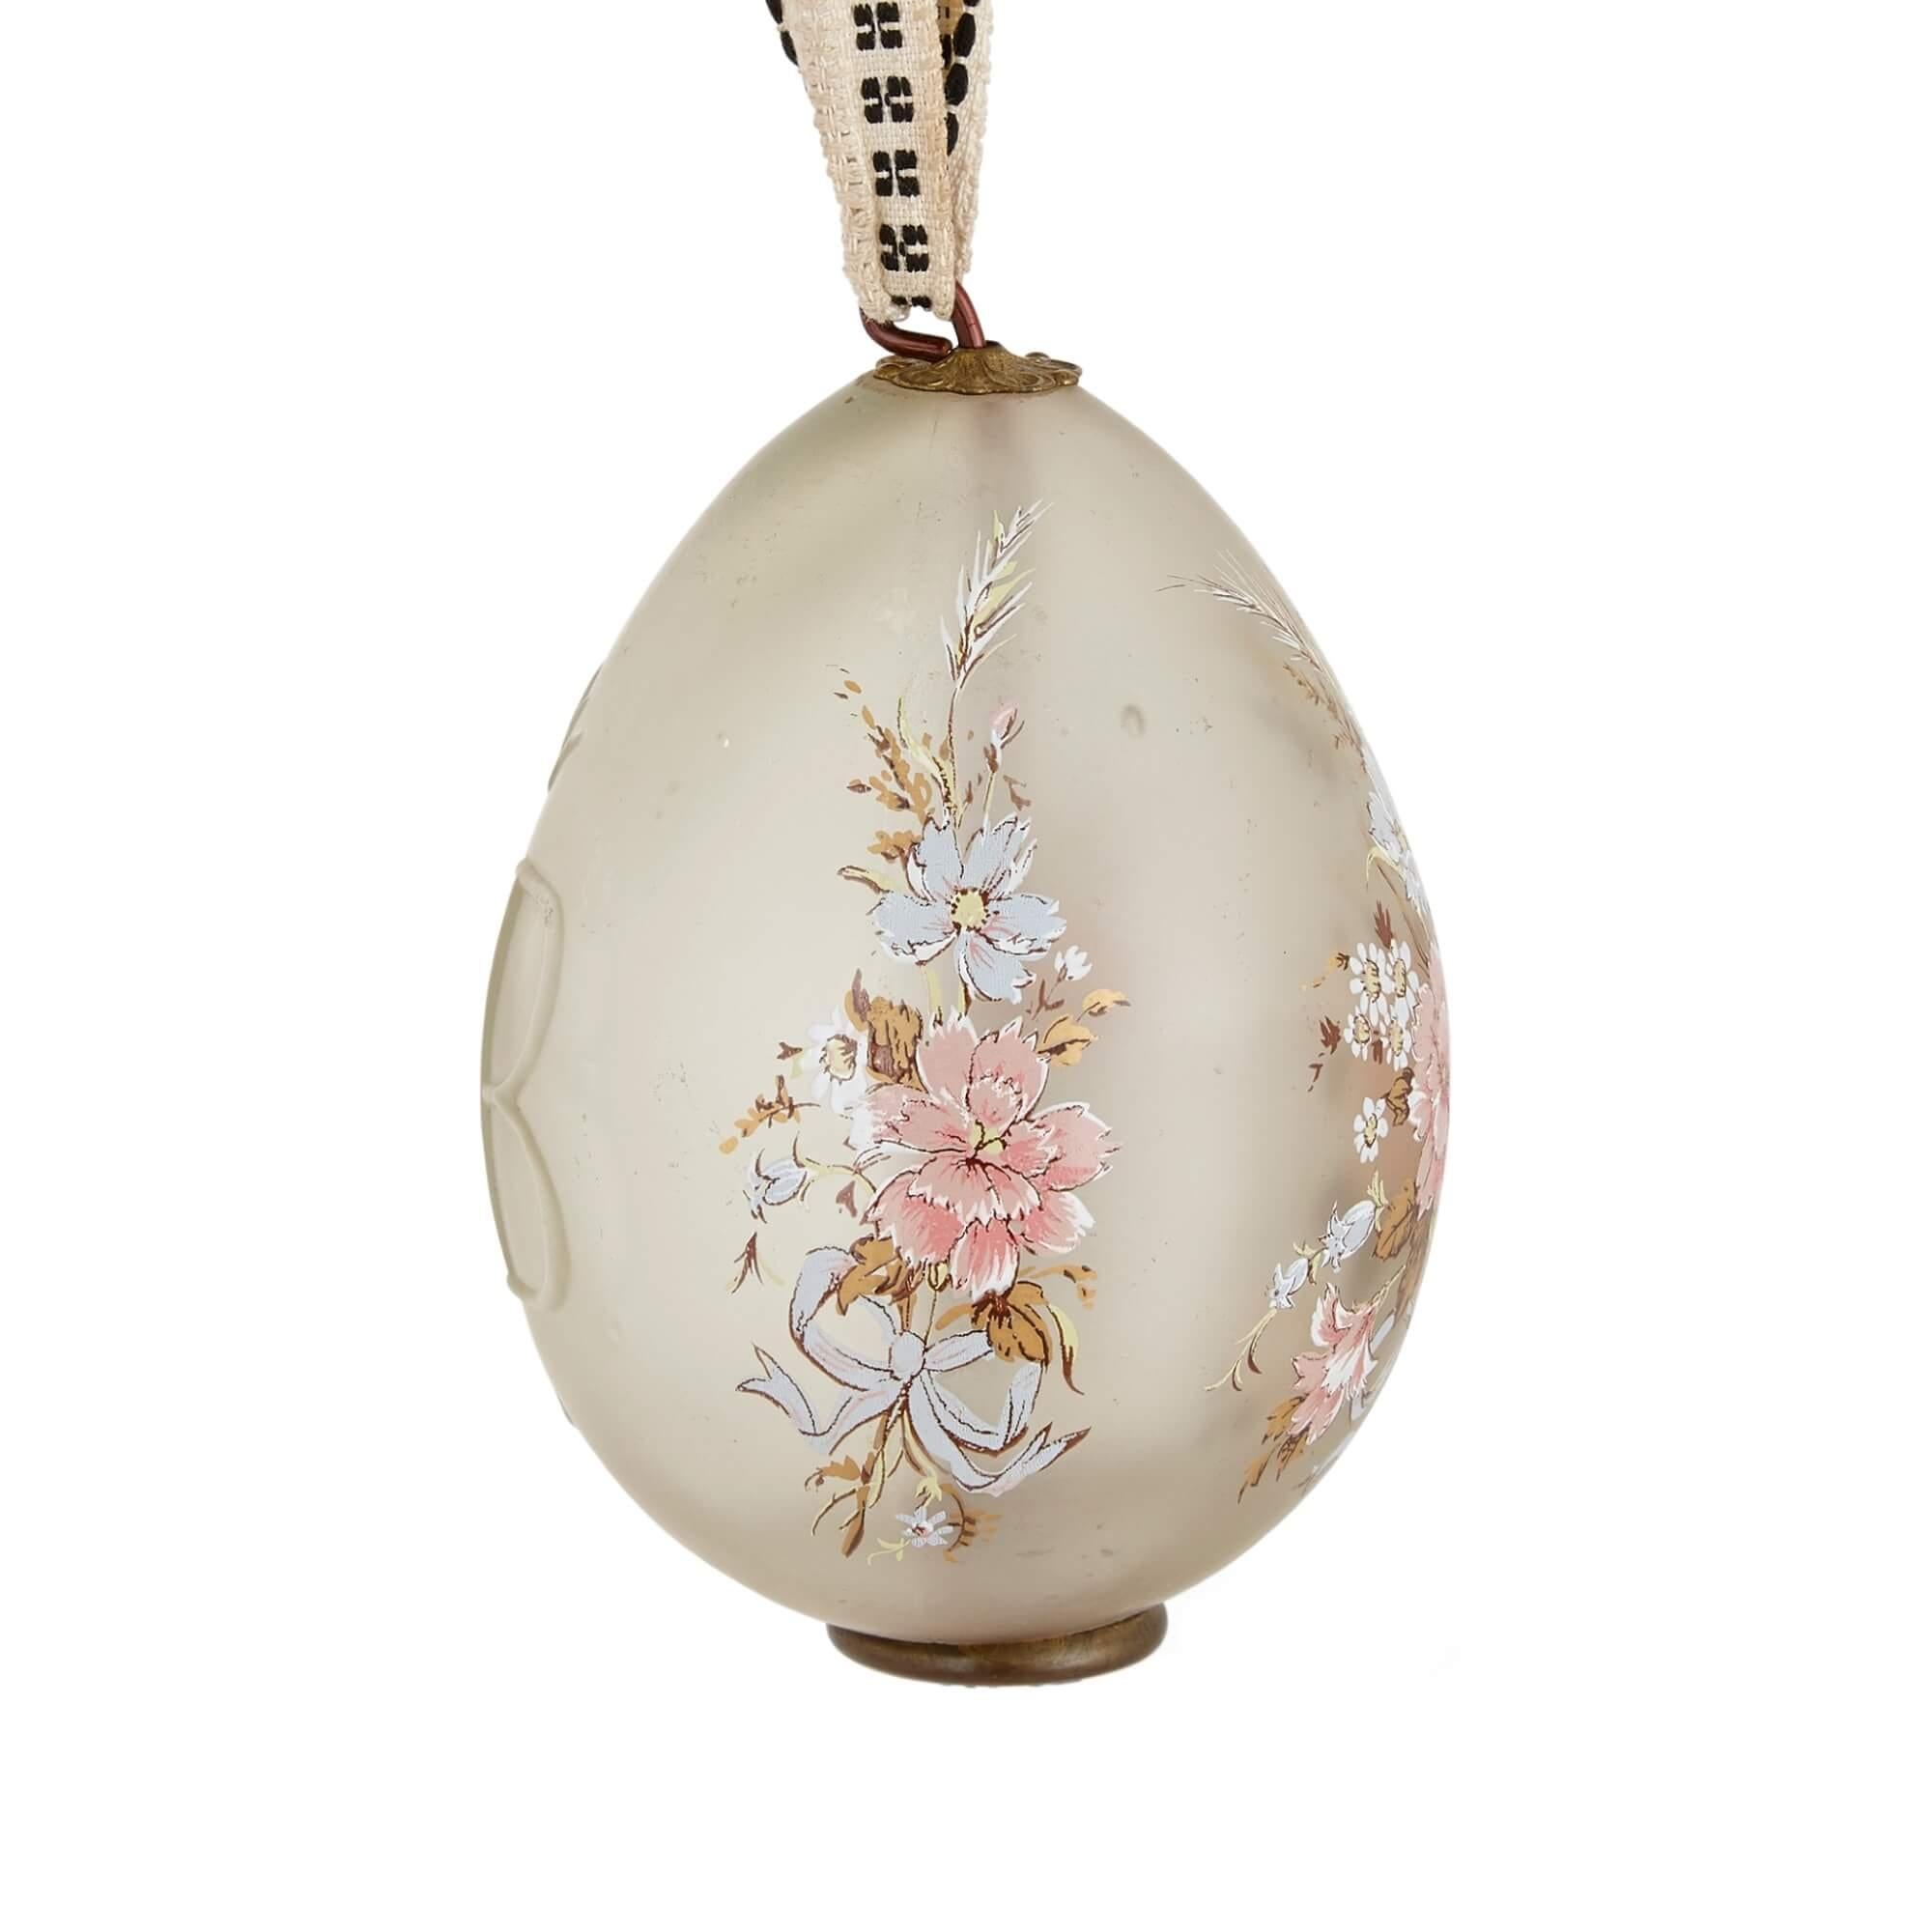 Antique Russian glass egg with enamel decoration
Russian, early 20th Century
Height 10cm, diameter 7cm

This fine glass egg is delicately formed, with the front and sides featuring floral bouquets in pastel shades executed in enamel, and the reverse